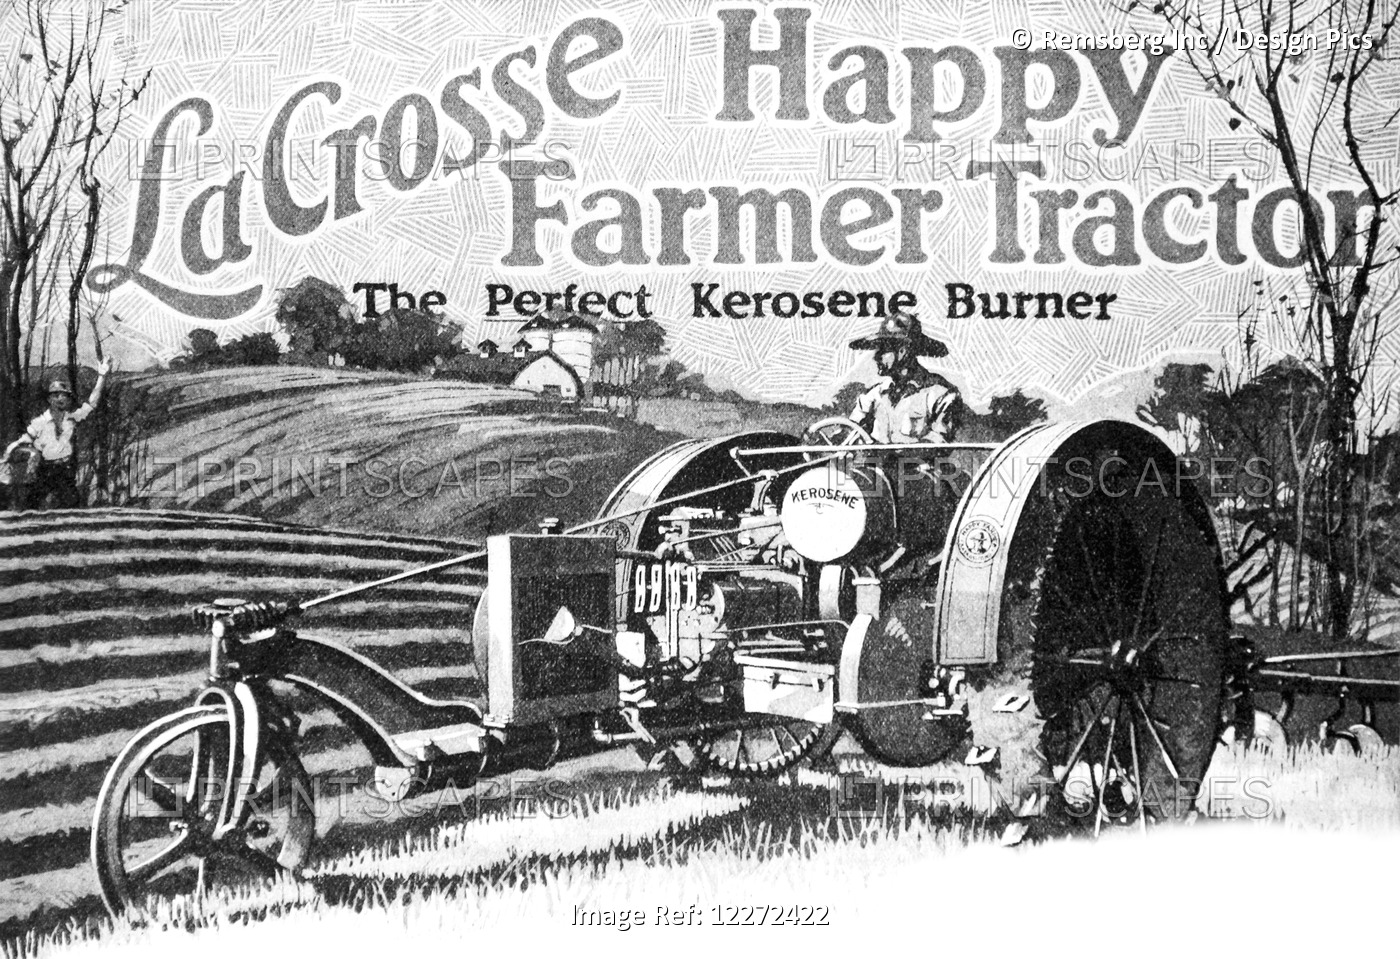 Historic Lacrosse Tractor Advertisement From The Early 20th Century.